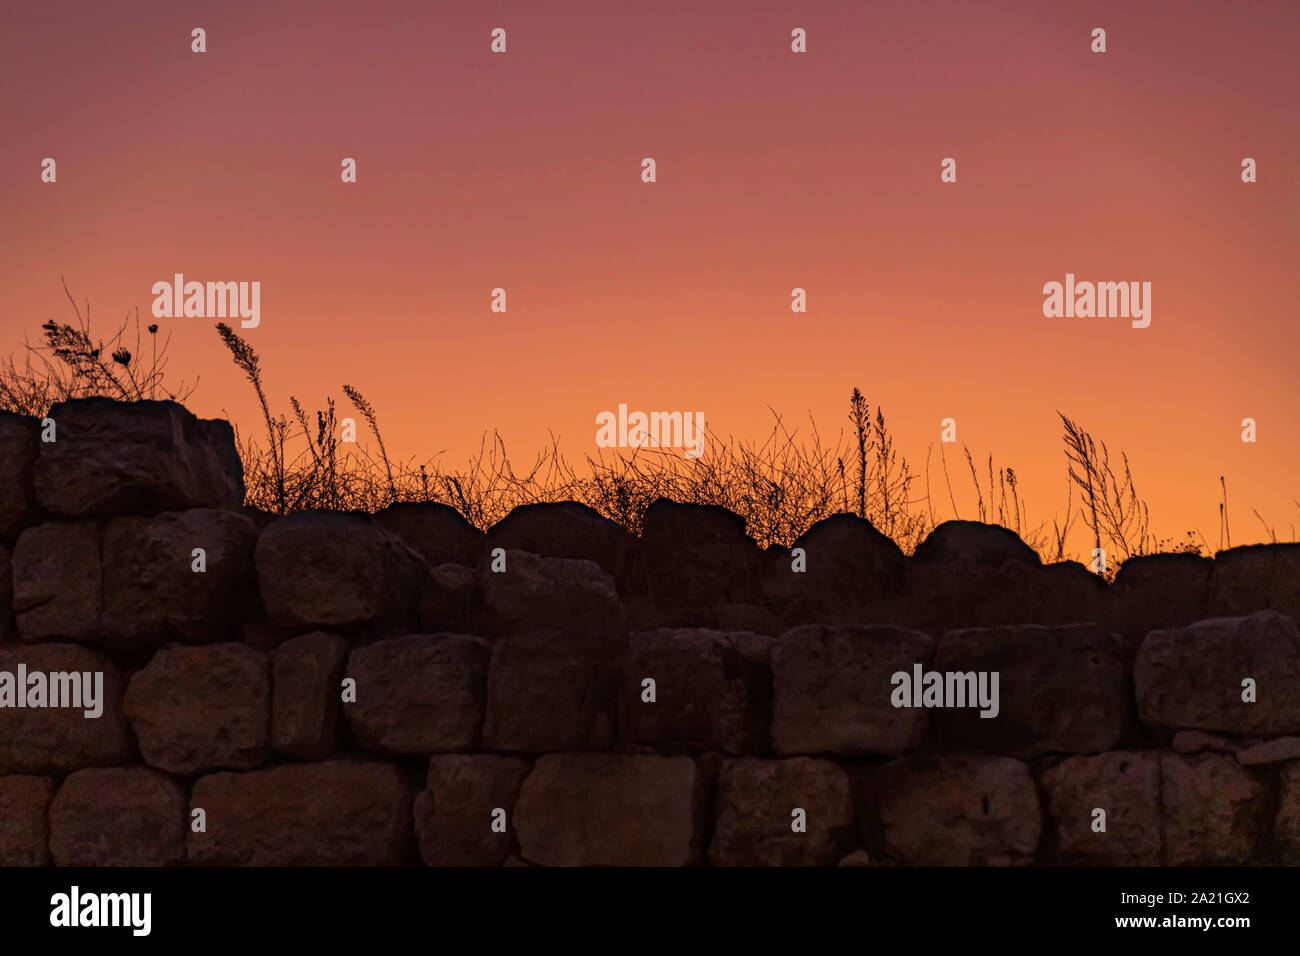 Silhouettes of plants against the background of a colorful sunset sky. Israel. Stock Photo